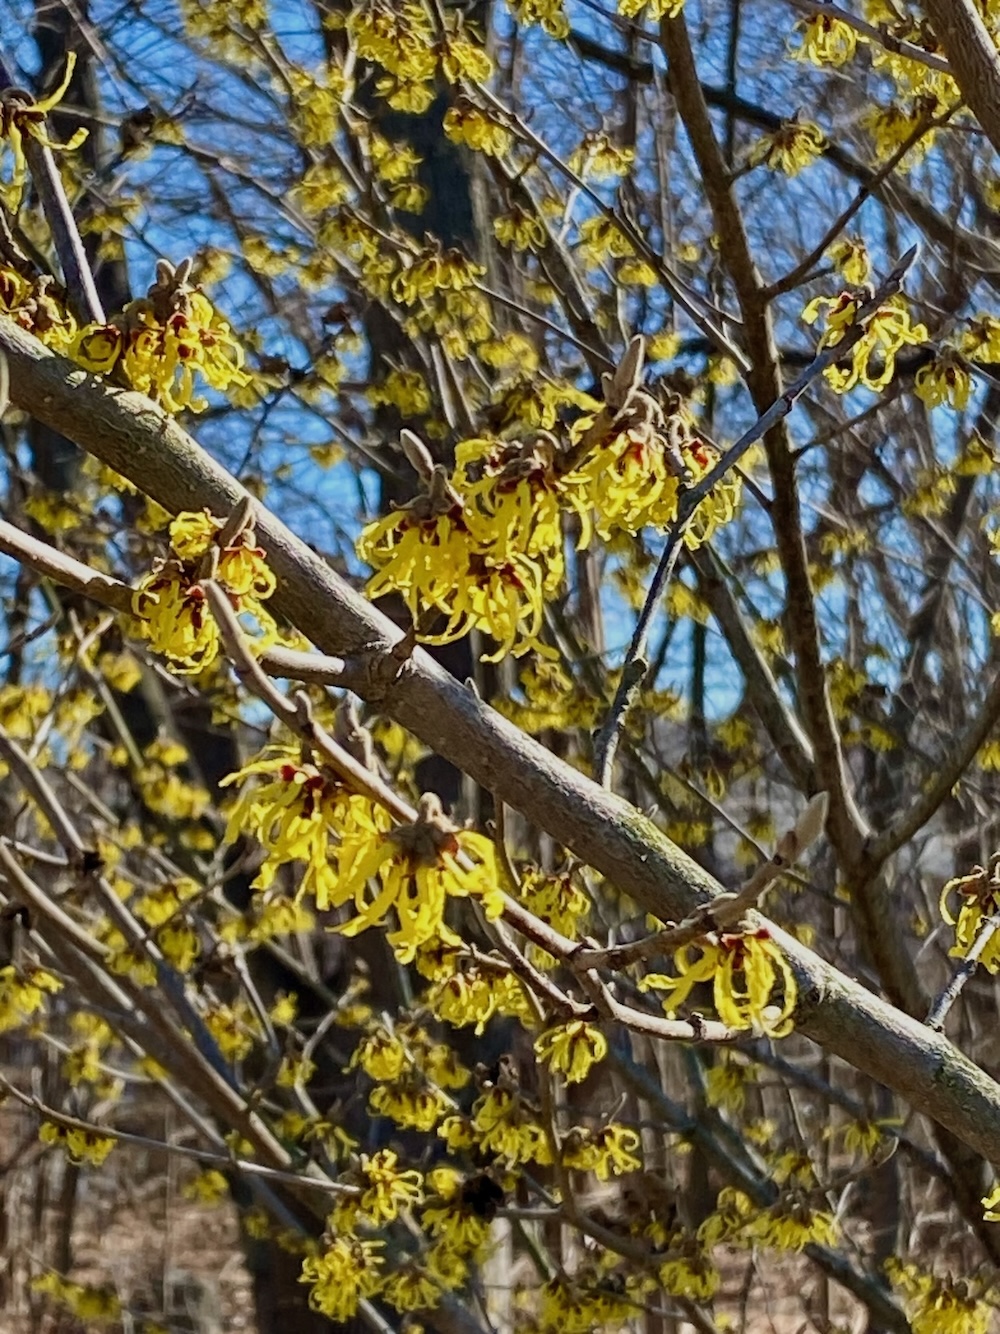 It's the weekend! Number 328, Branches of Witch Hazel in Bloom